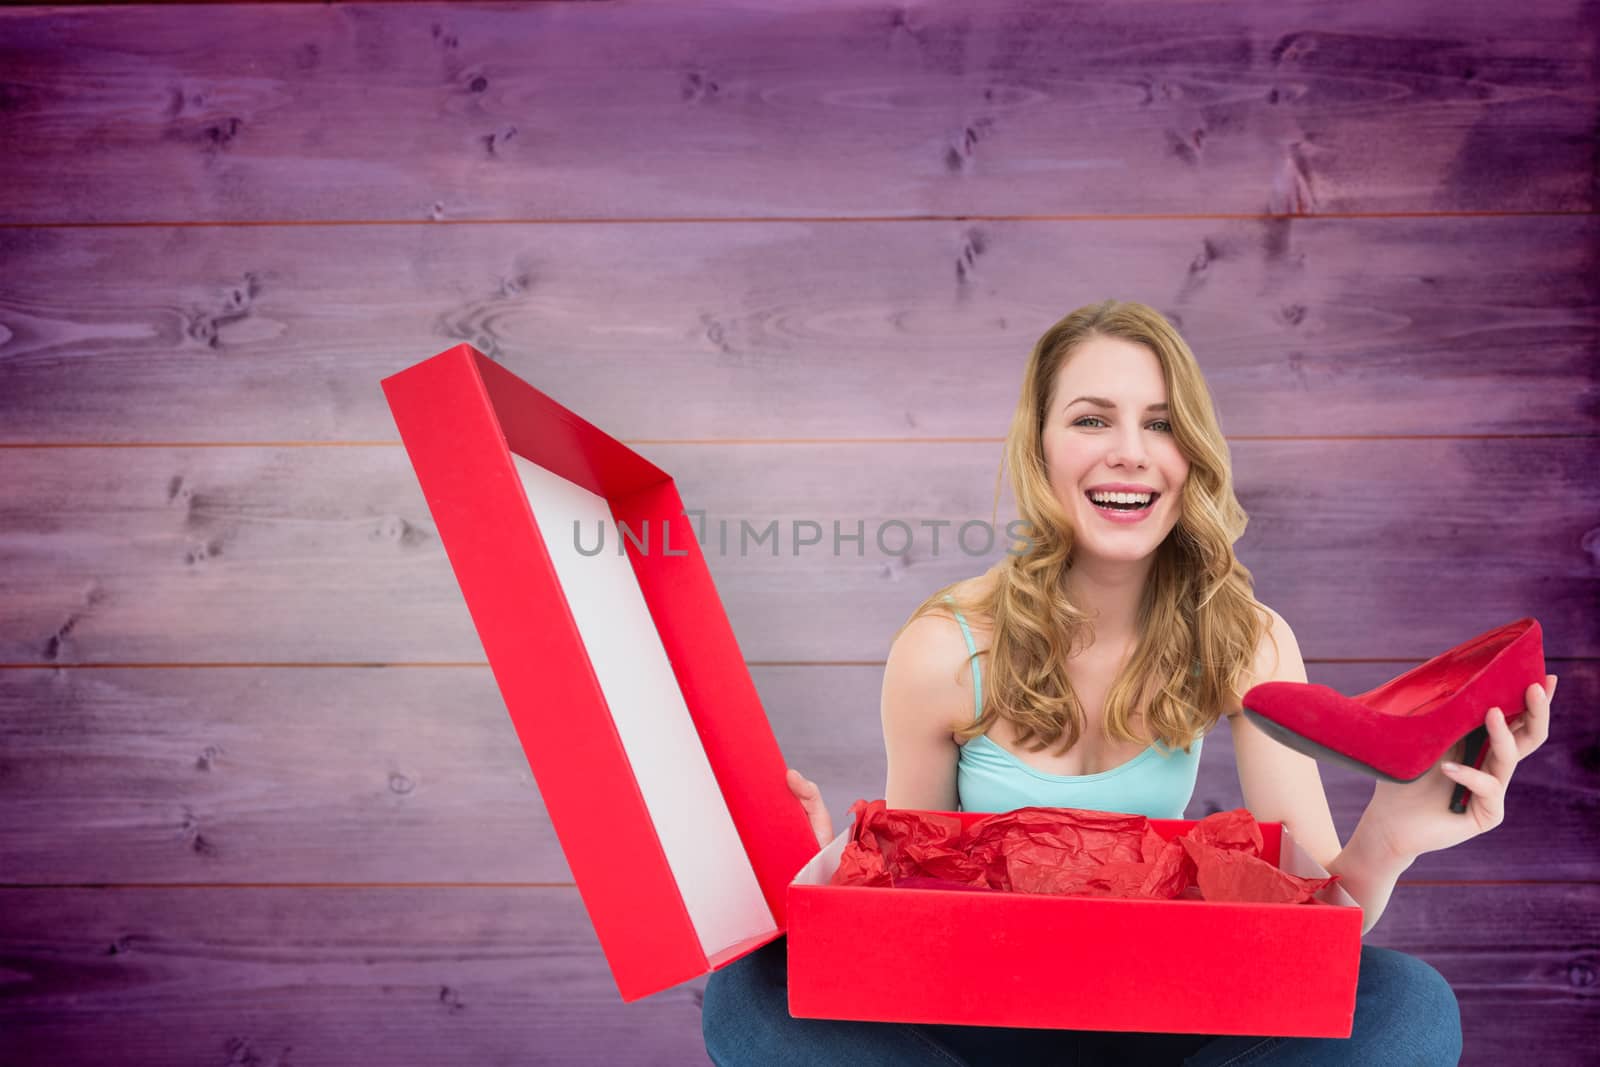 Smiling young woman showing her new shoes against wooden planks background